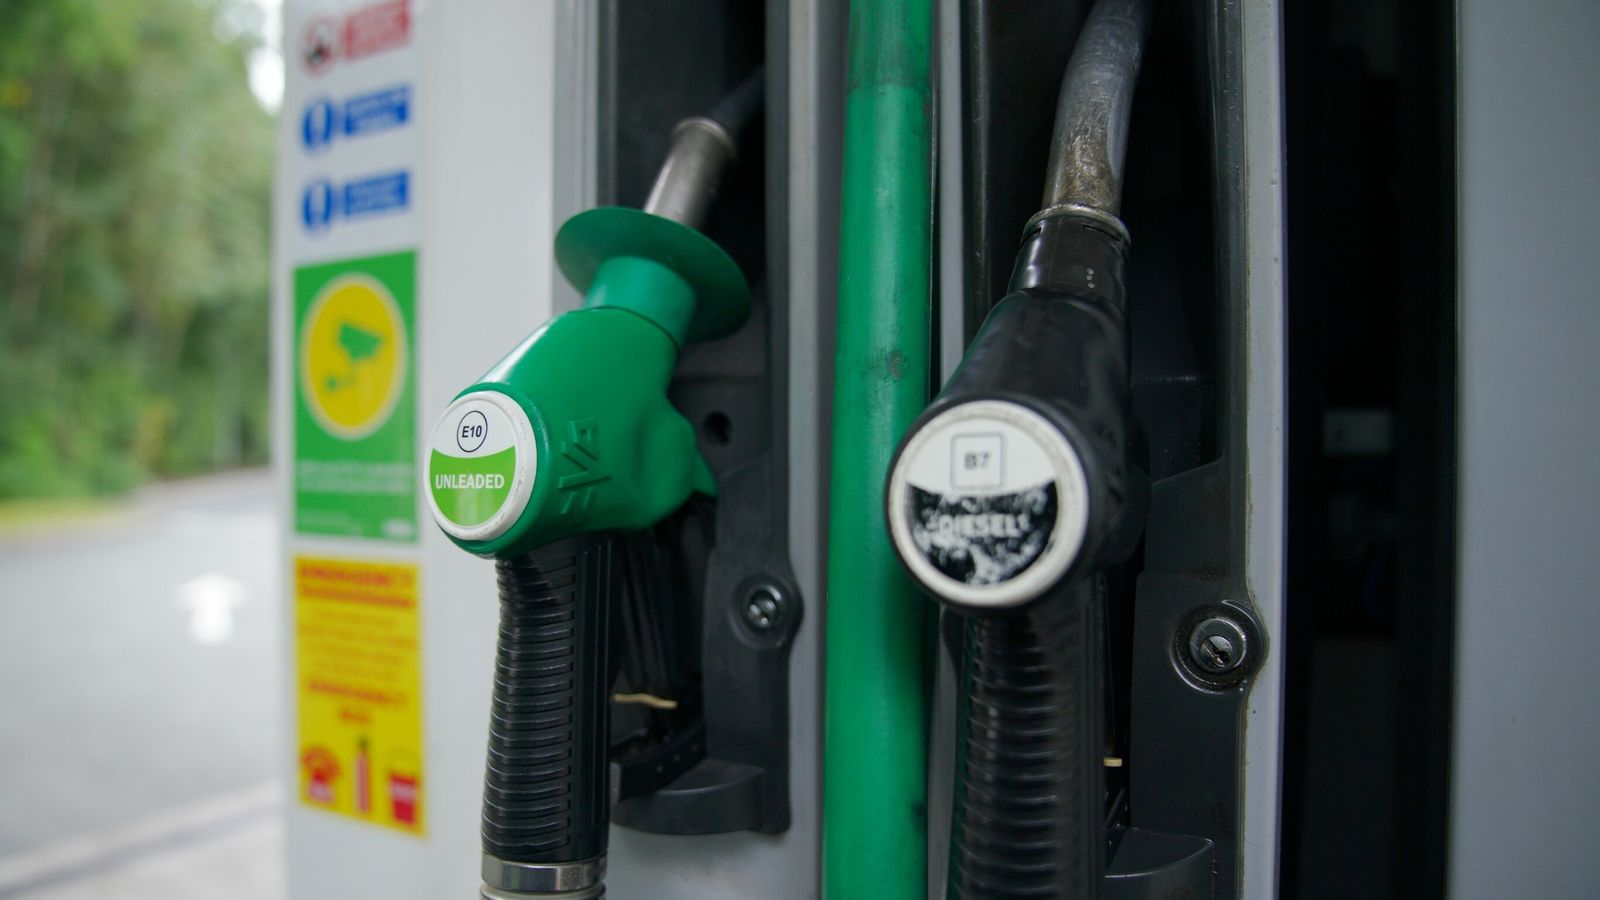 Asda deal for Co-op petrol stations could lead to higher prices or less choice, CMA warns